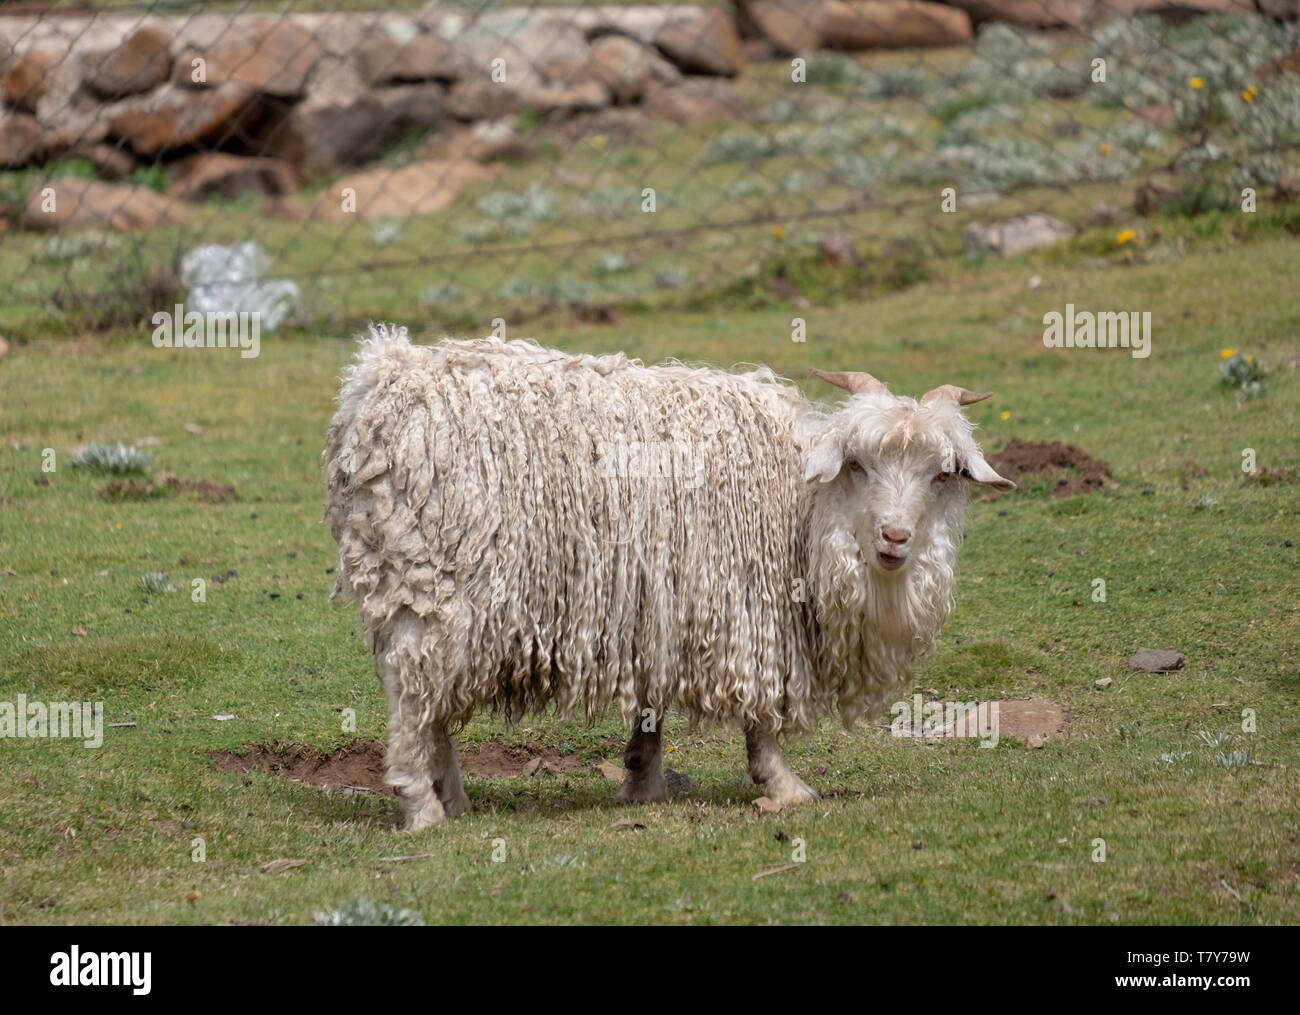 Mountain goat in the hills near Mokhotlong in Lesotho, Africa Stock Photo